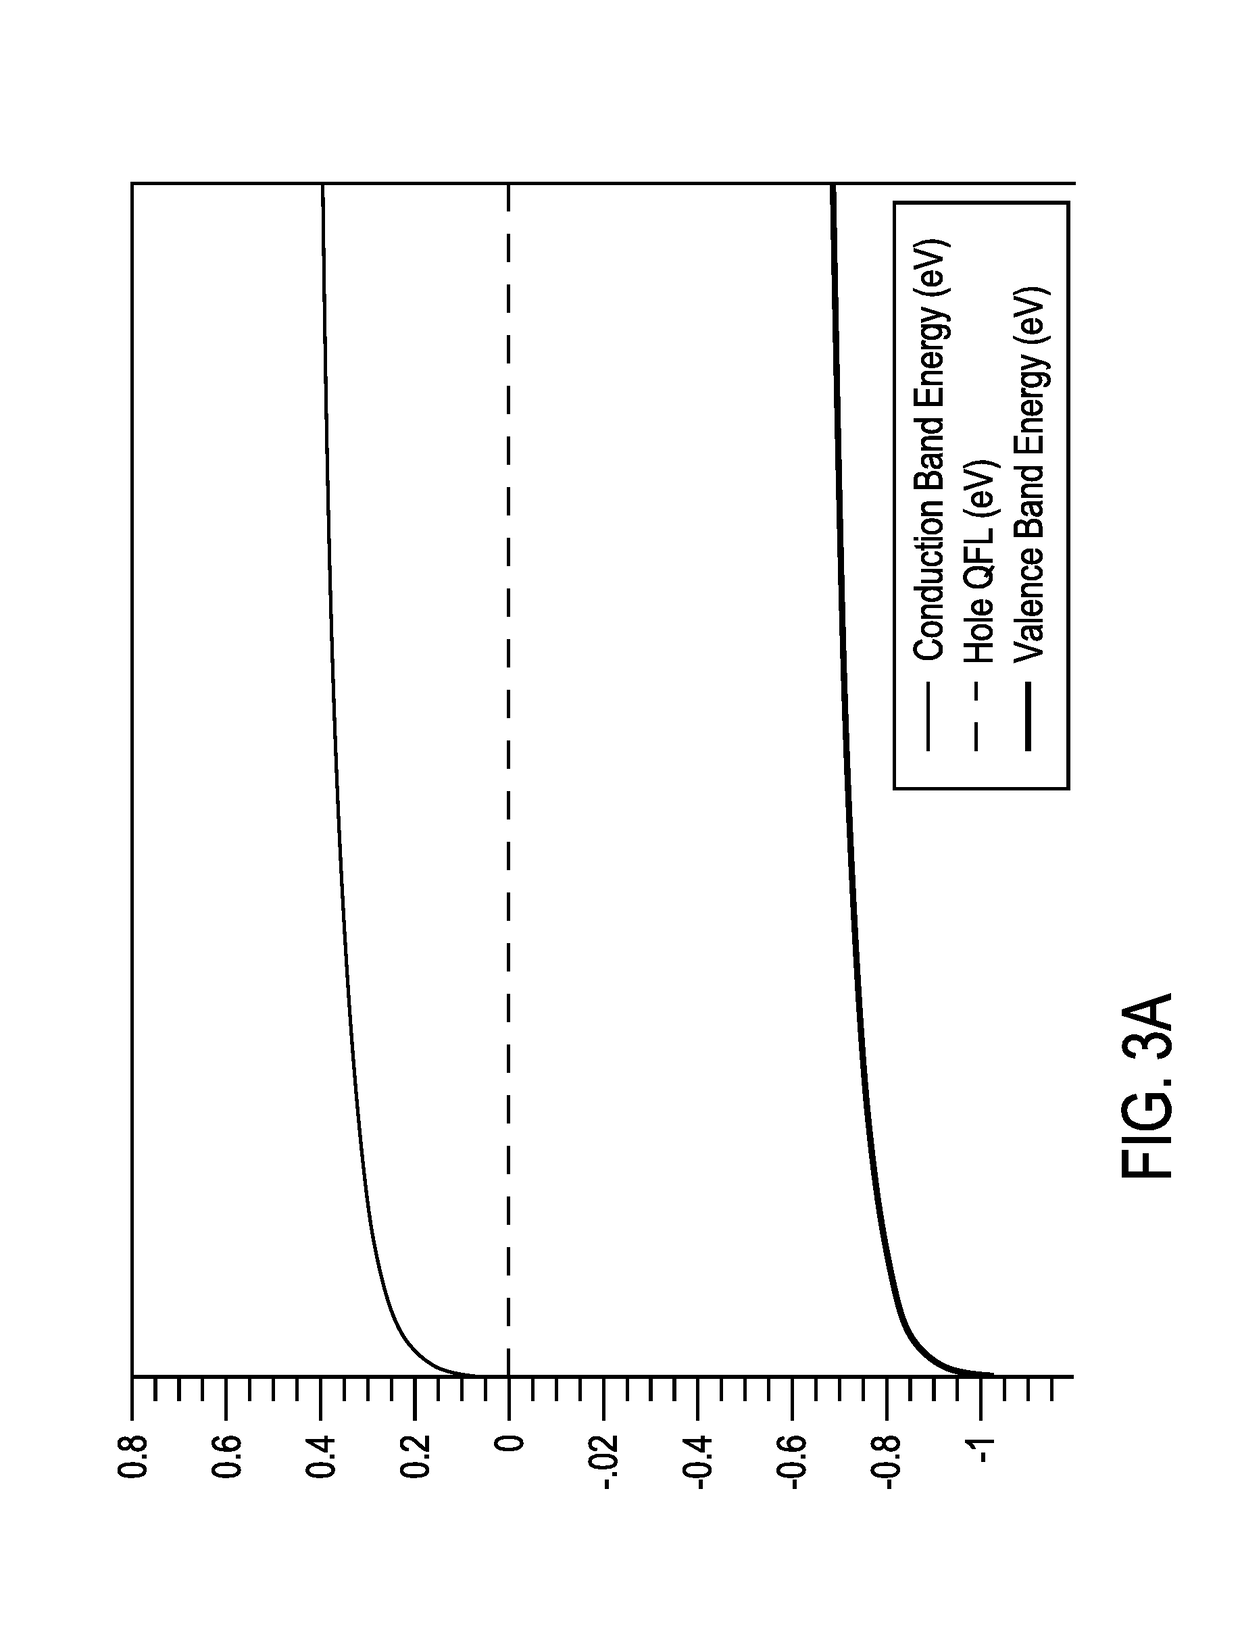 Nanowire transistor with source and drain induced by electrical contacts with negative schottky barrier height